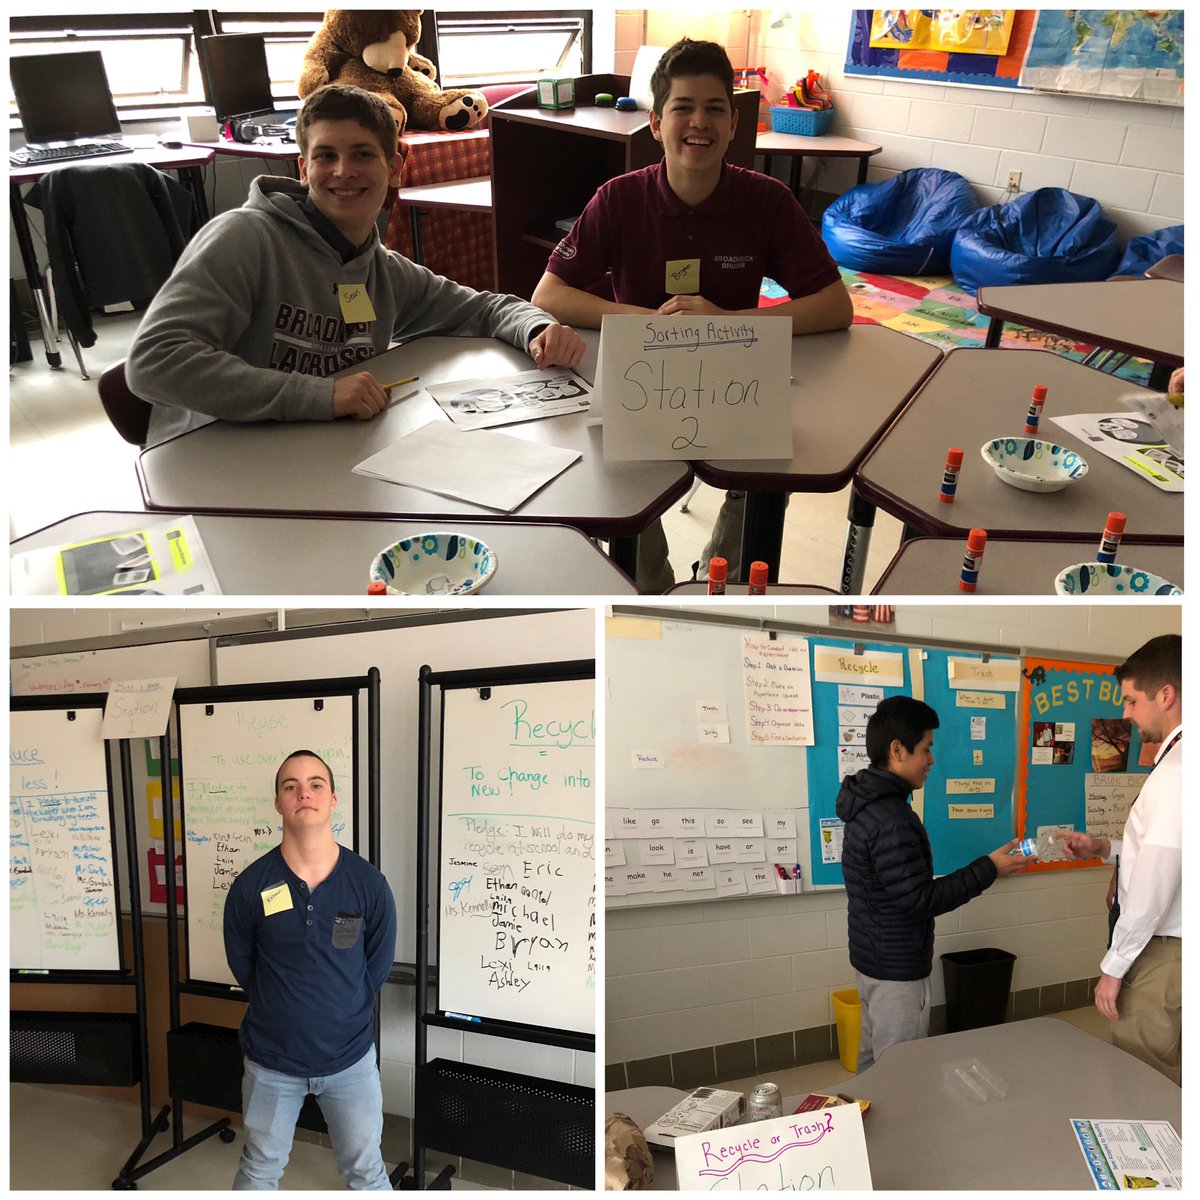 Our ACC students have been learning about recycling! Today they became Recycling Ambassadors and hosted a station rotation presentation for students and staff! We even signed a pledge to better our environment! #AACPSAwesome #EnvironmentalLiteracy @AACPSSignatures @mimi_gerbs I